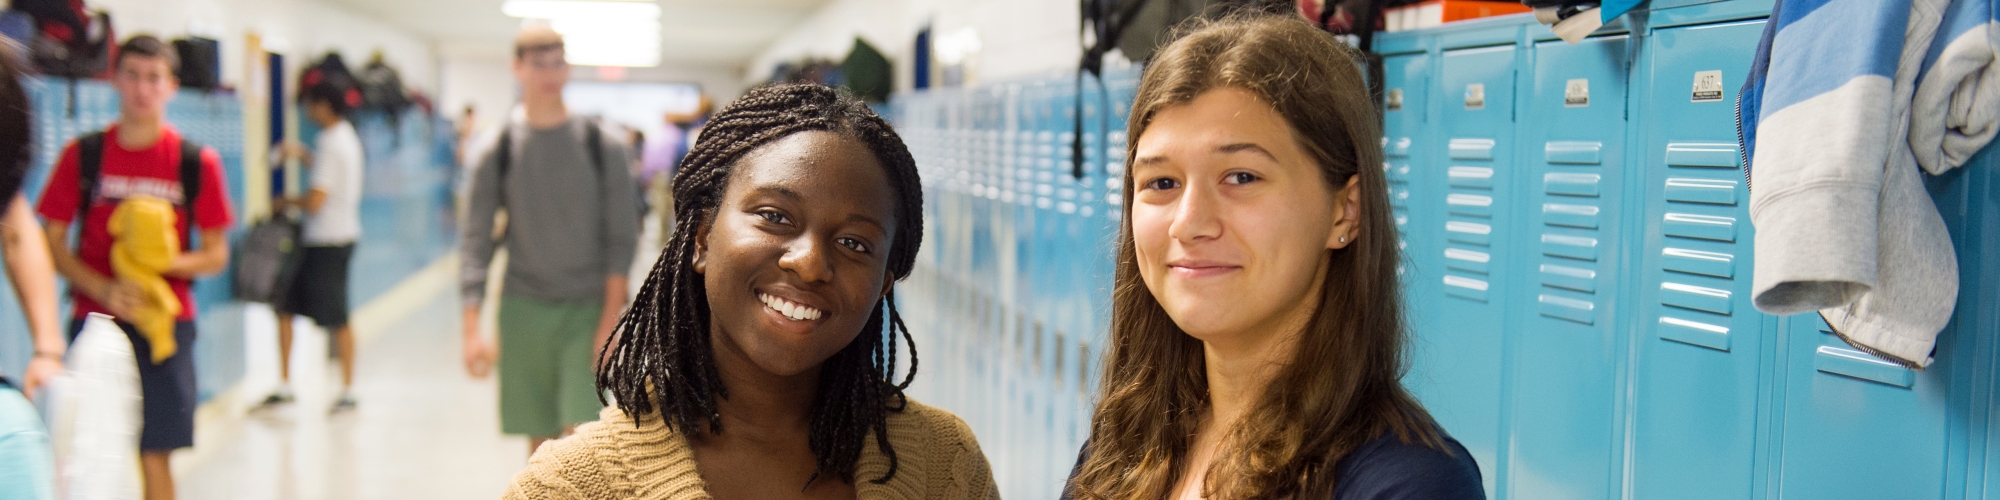 two female students standing in front of blue lockers in a school hallway